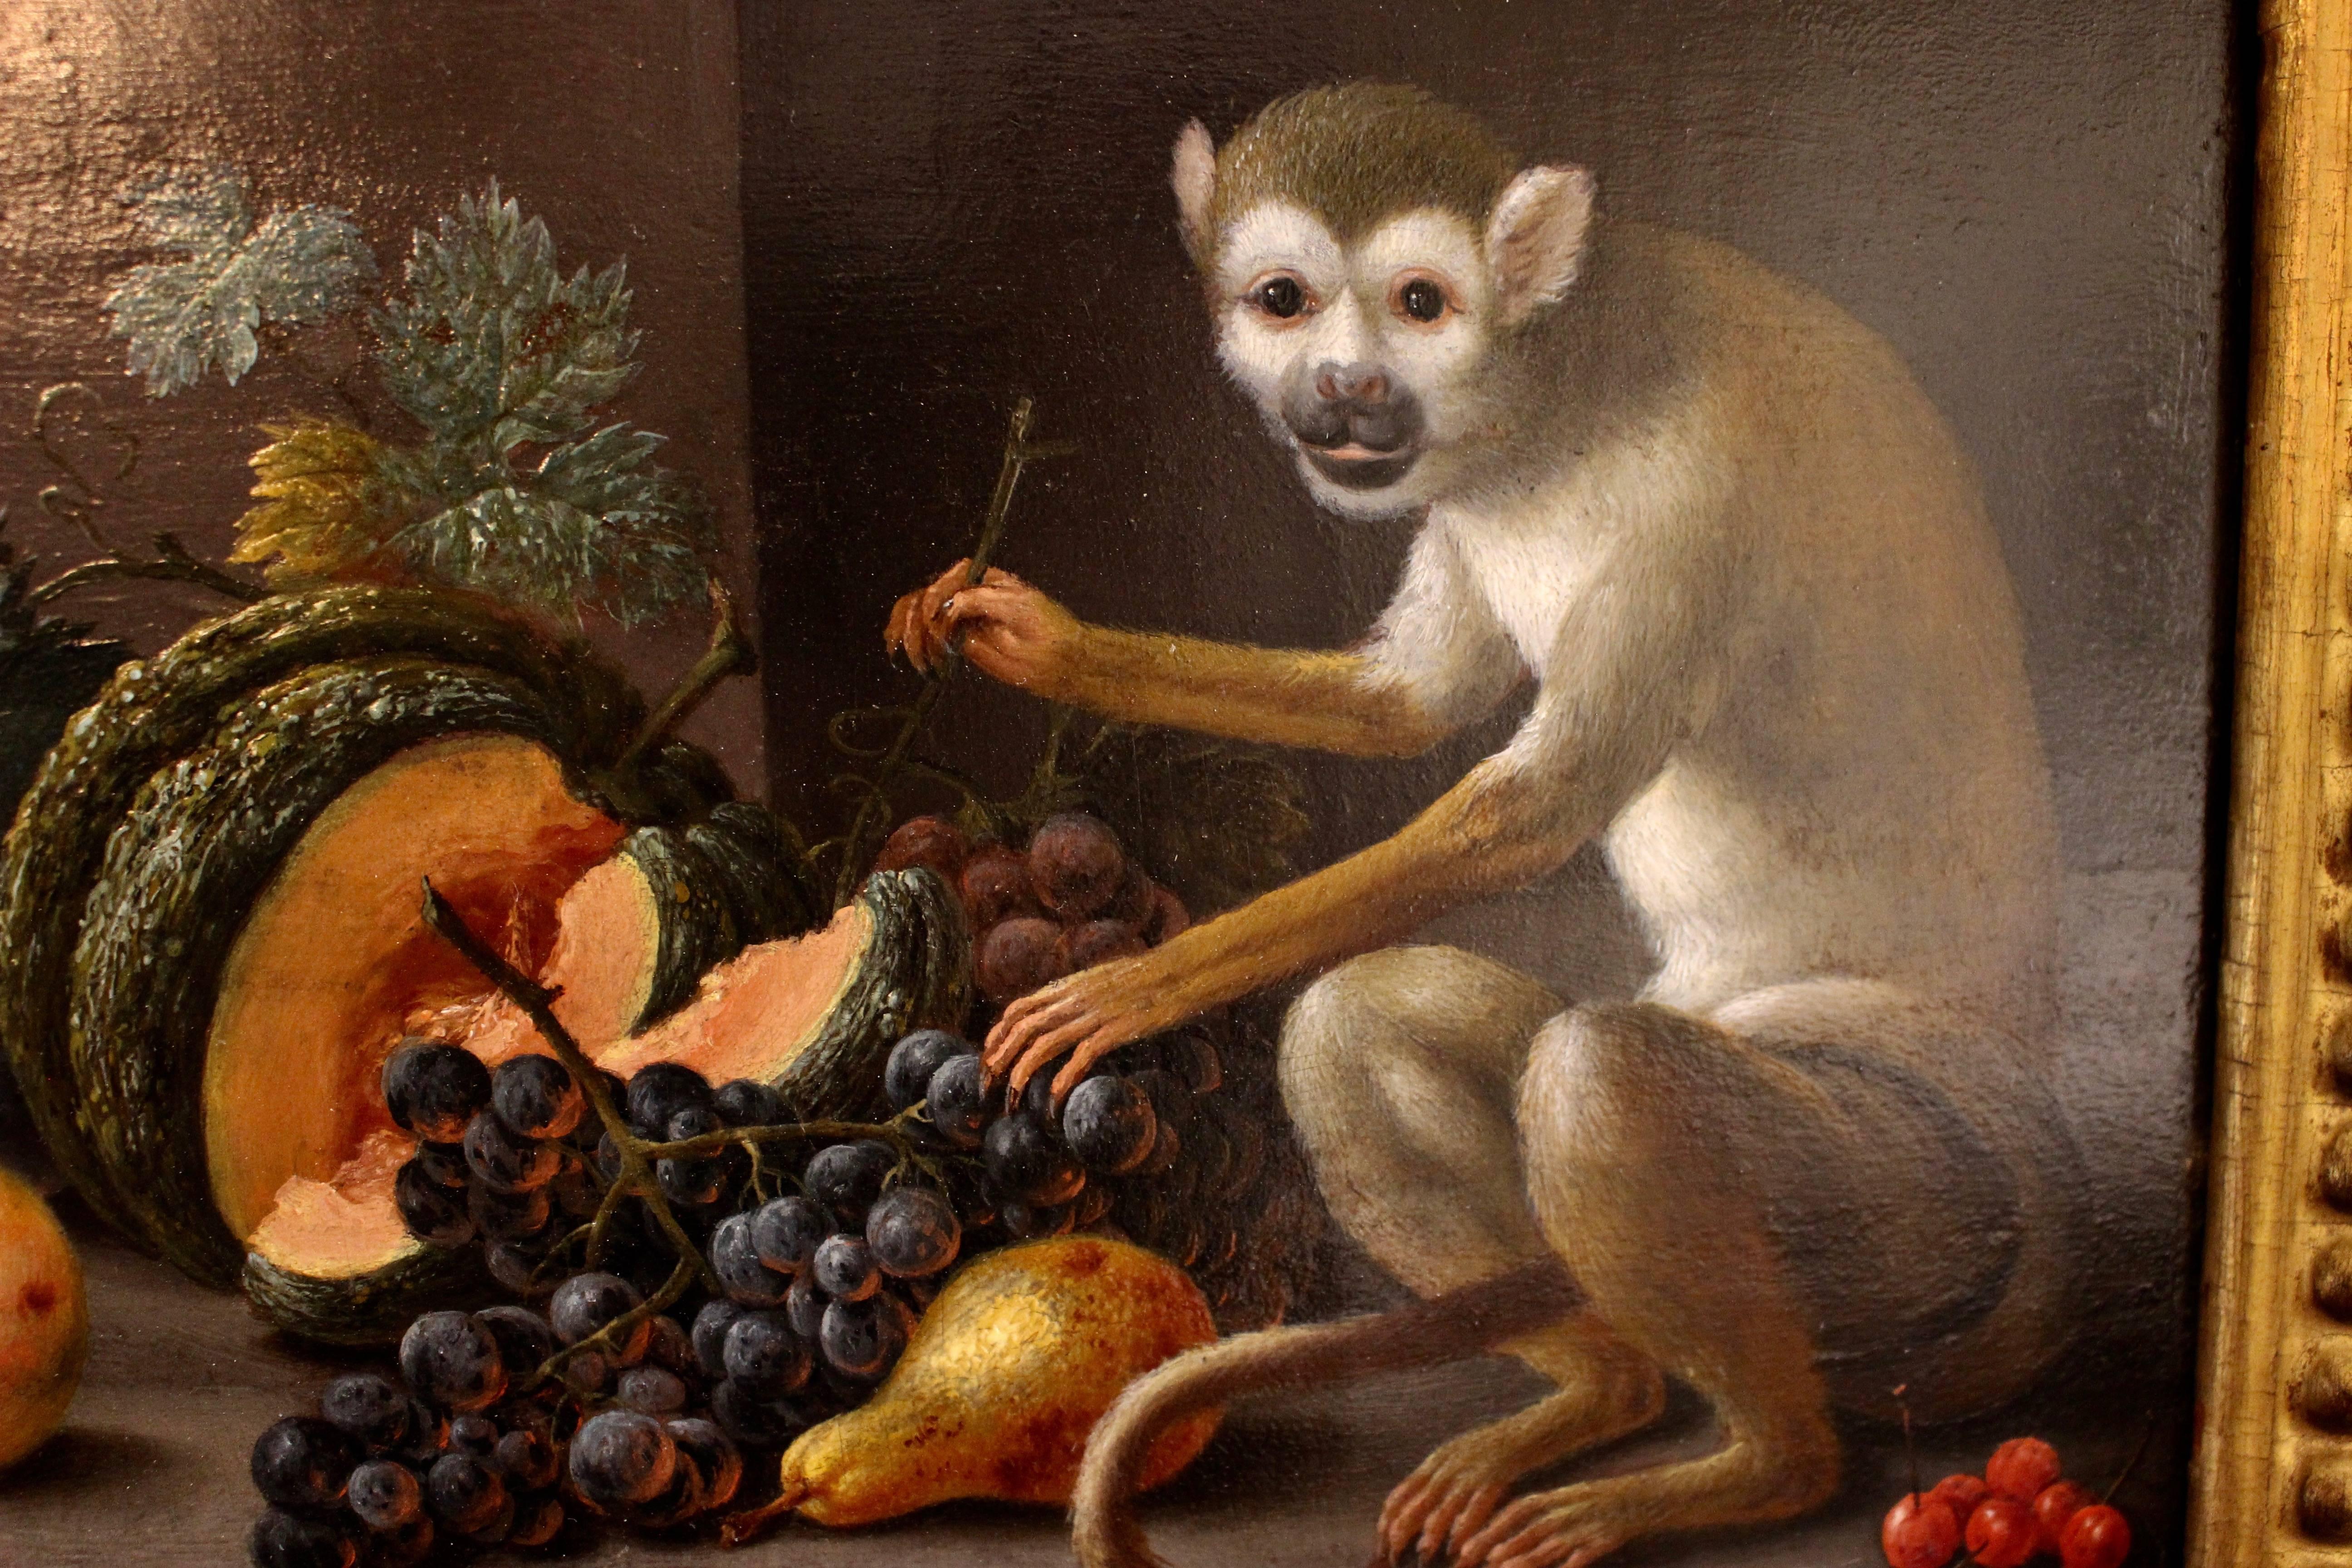 A charming image in still life fashion of a monkey with a melon, peaches, plums, grapes, cherries and a pear. Beautifully gilt-framed. Signed and dated 